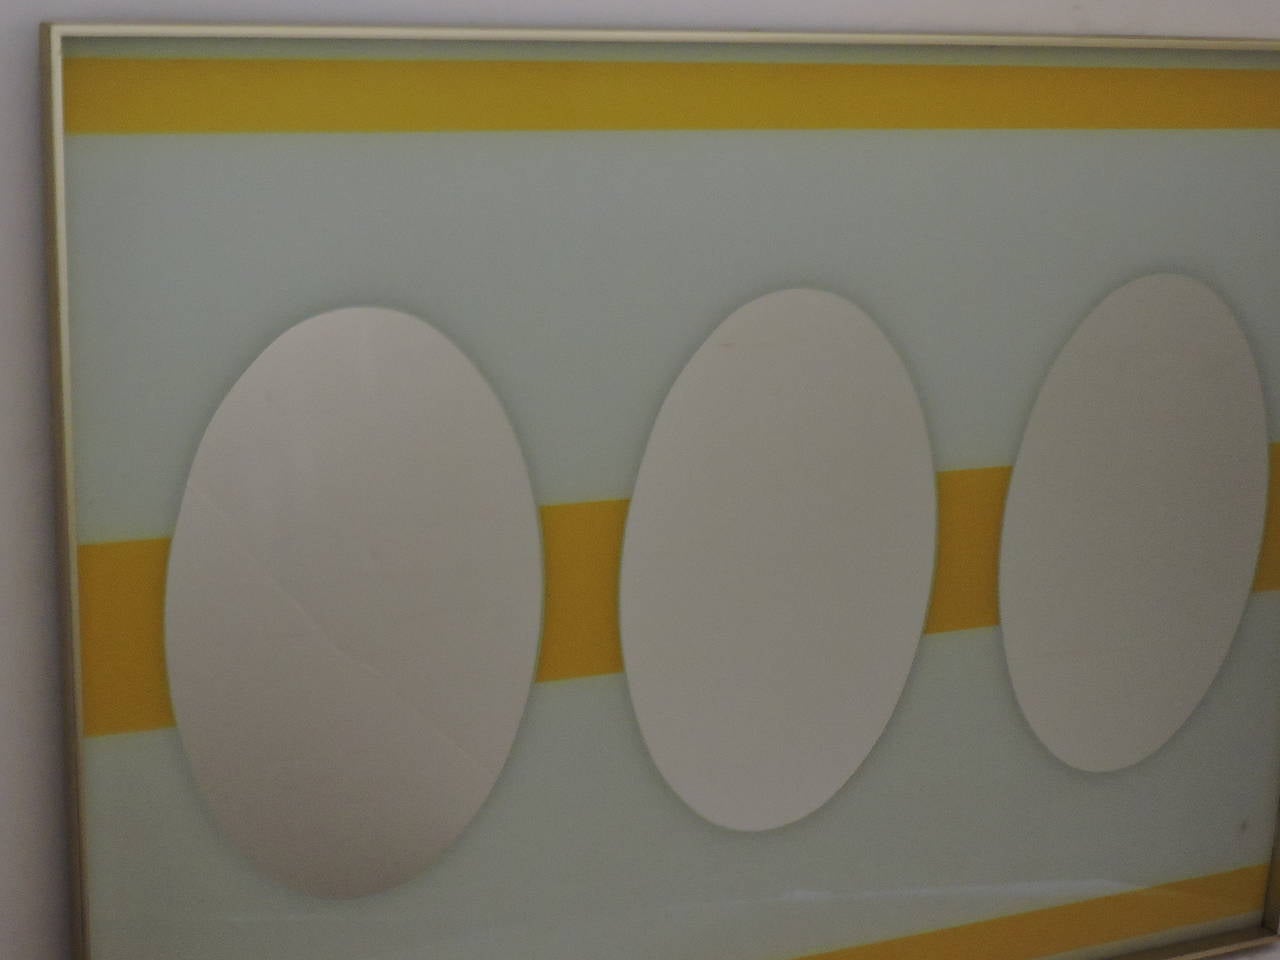 A great looking high quality large op art mirror with three central oval mirrors set within a striped yellow and white reverse painted glass field housed in a thick brass frame work. American, circa 1960 - 1970. Look at all pictures and read